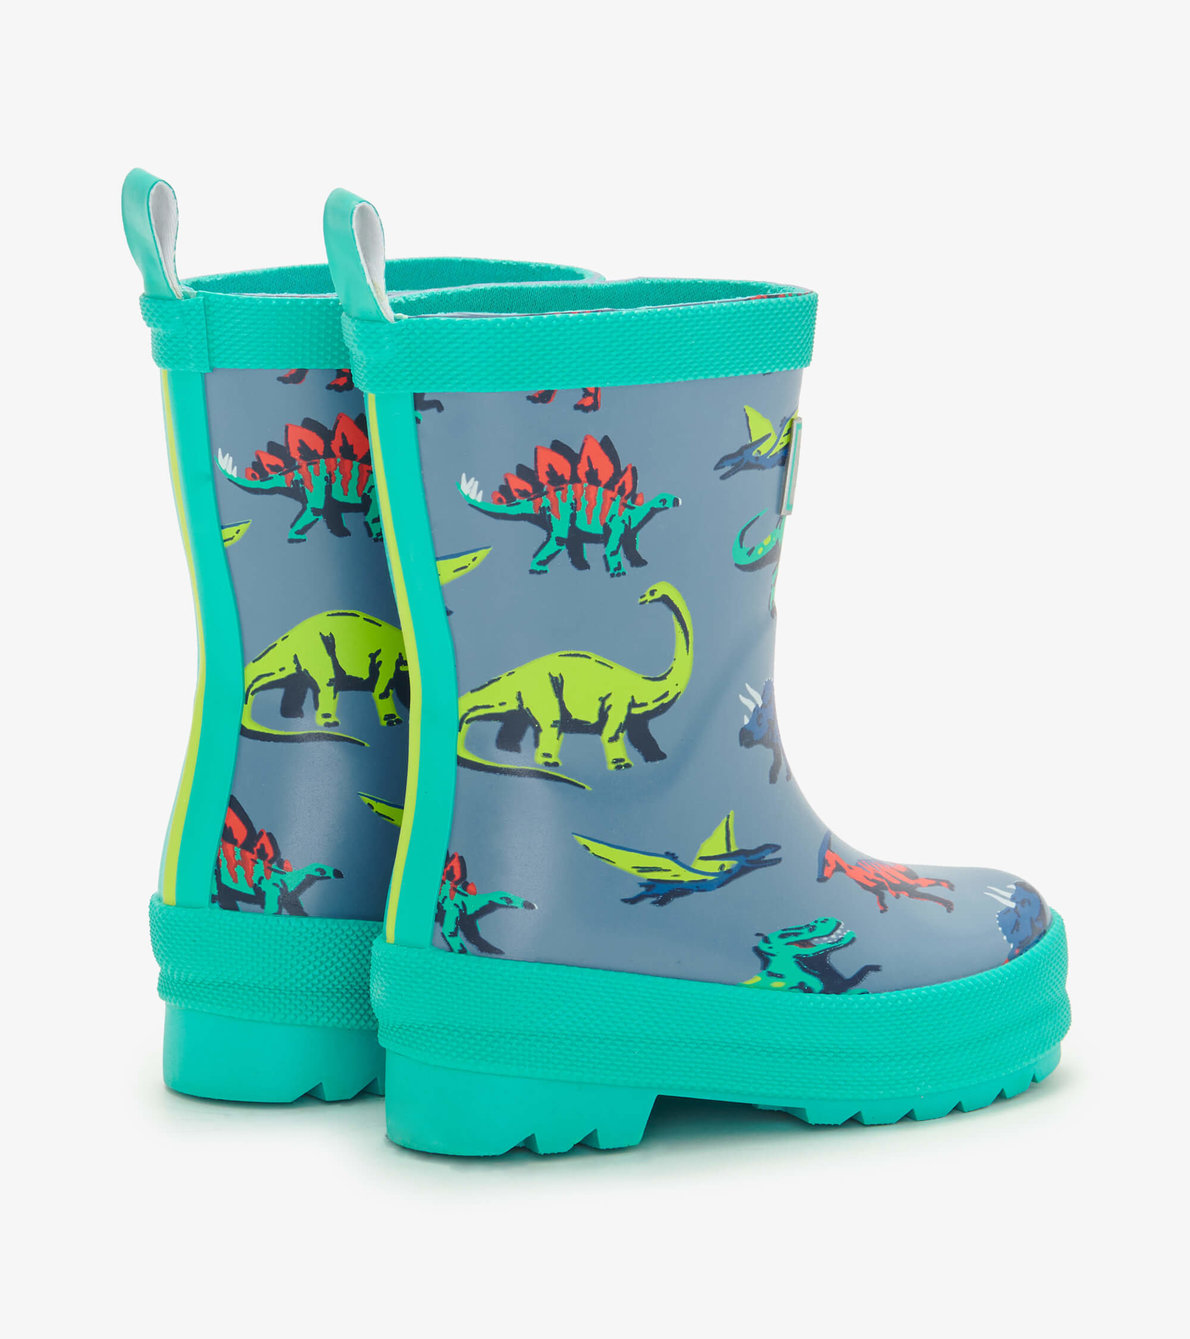 View larger image of My 1st Rain Boots - Dangerous Dinos